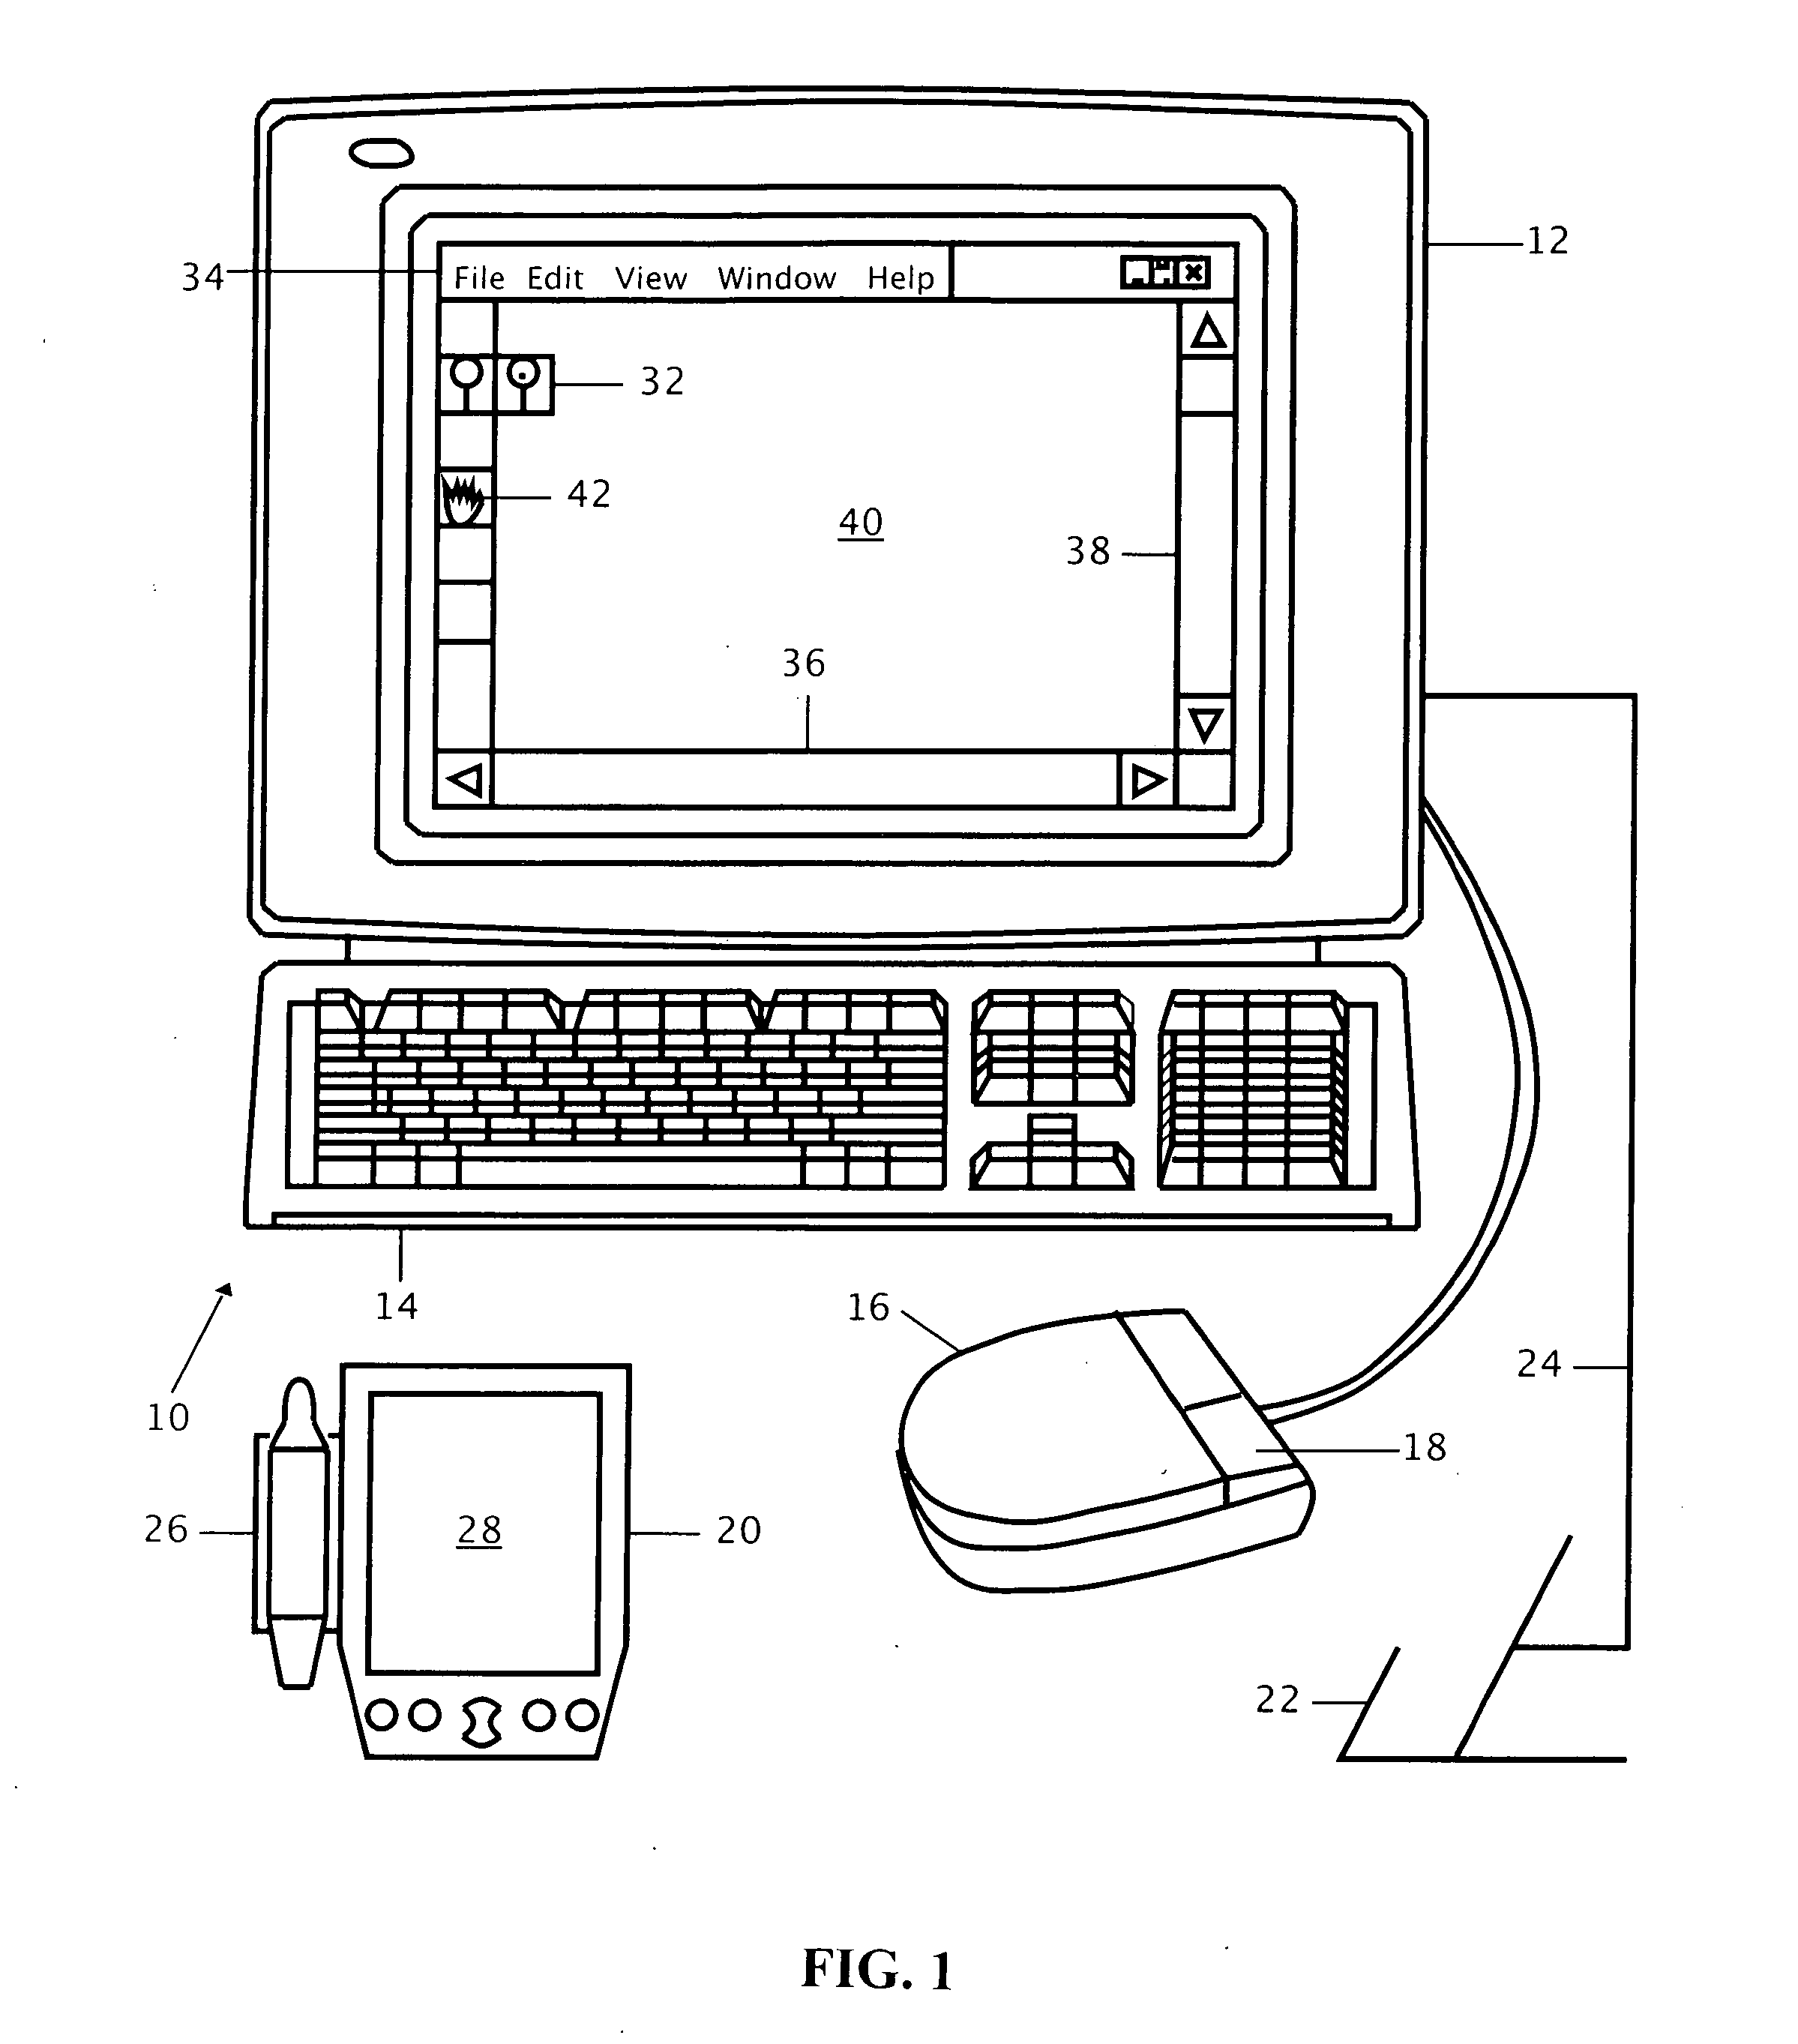 Motion detection and tracking system to control navigation and display of portable displays including on-chip gesture detection